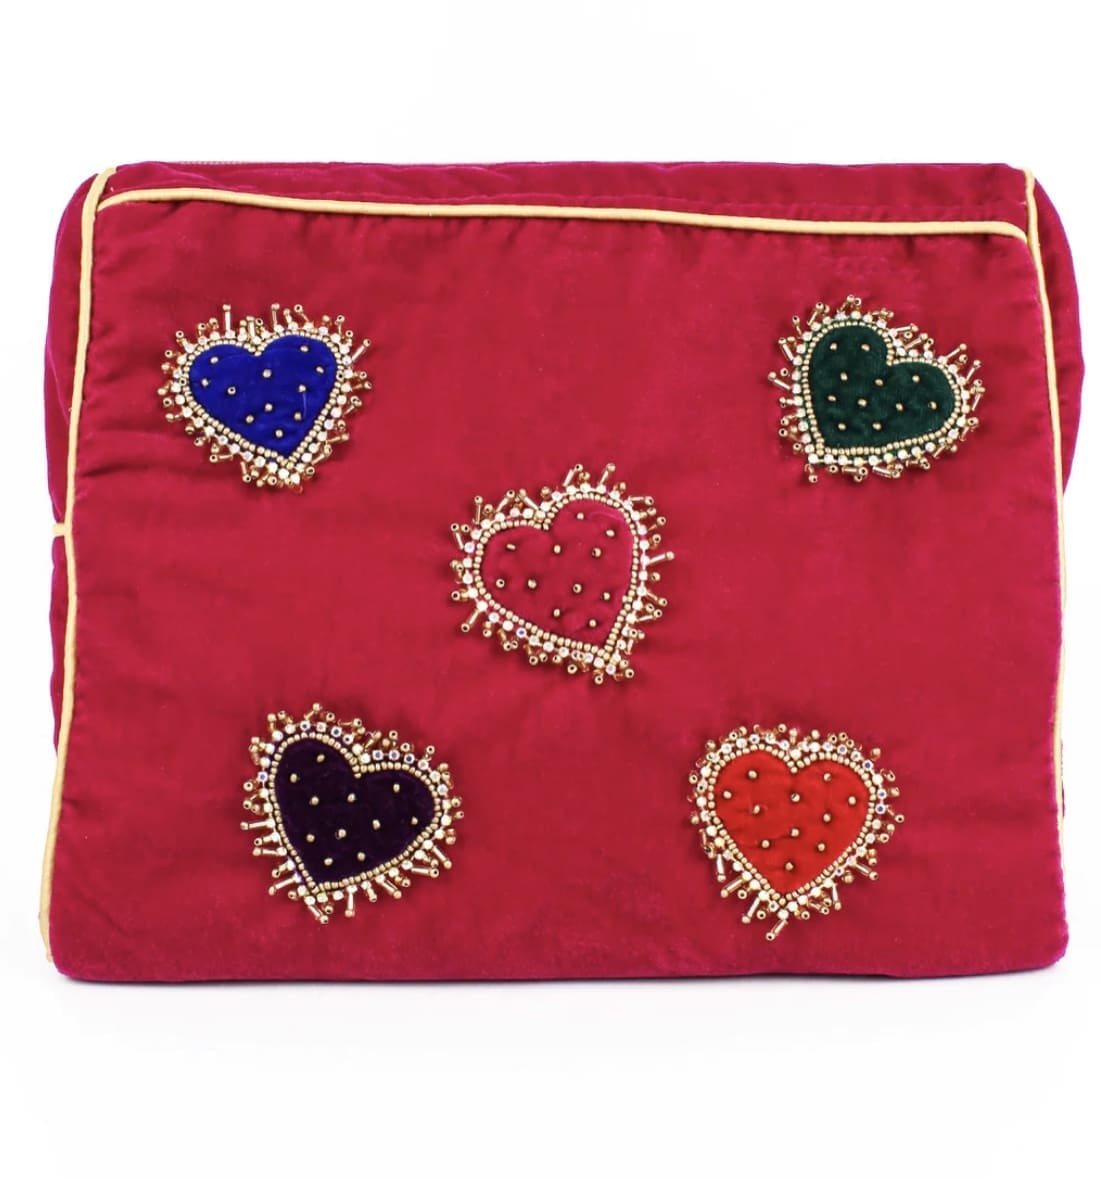 A red pouch with hearts on it.